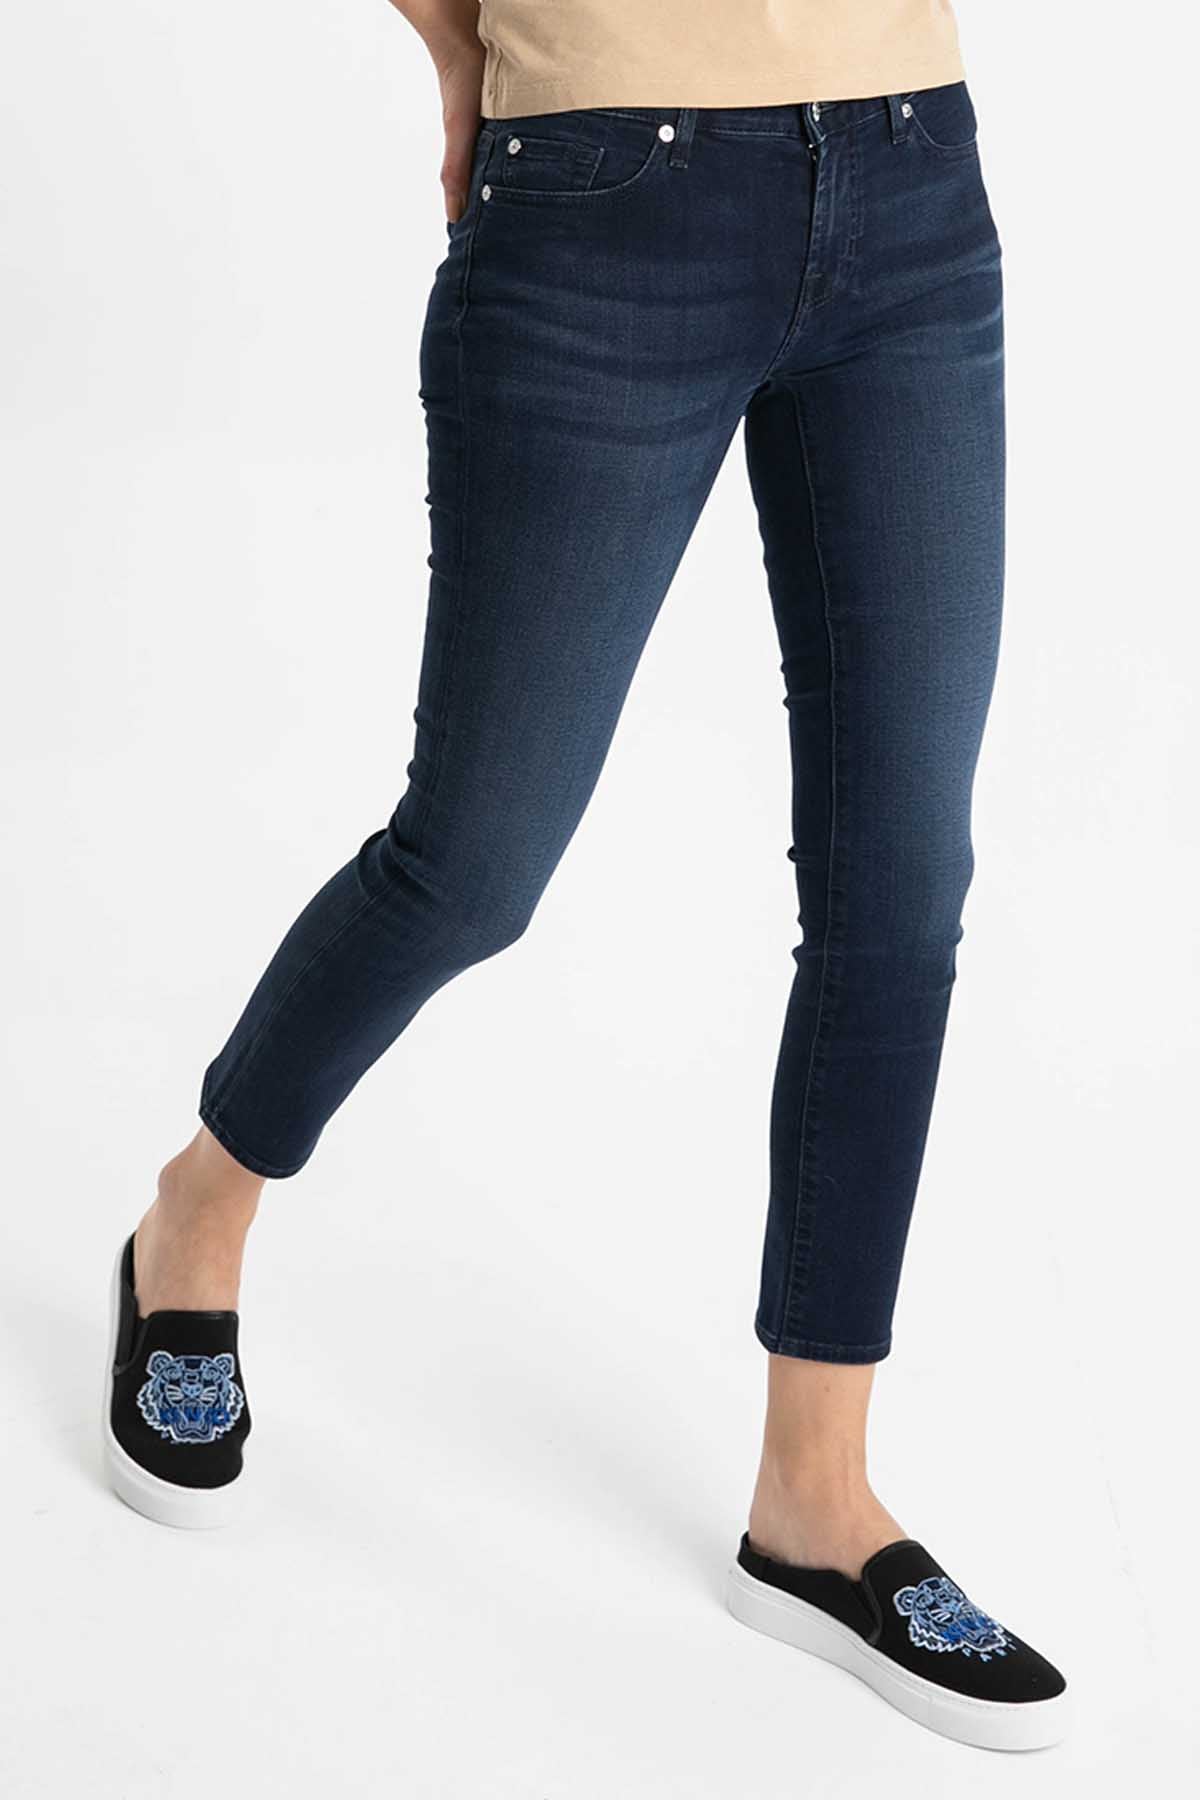 7 For All Mankind Slim Fit B Air Jeans-Libas Trendy Fashion Store